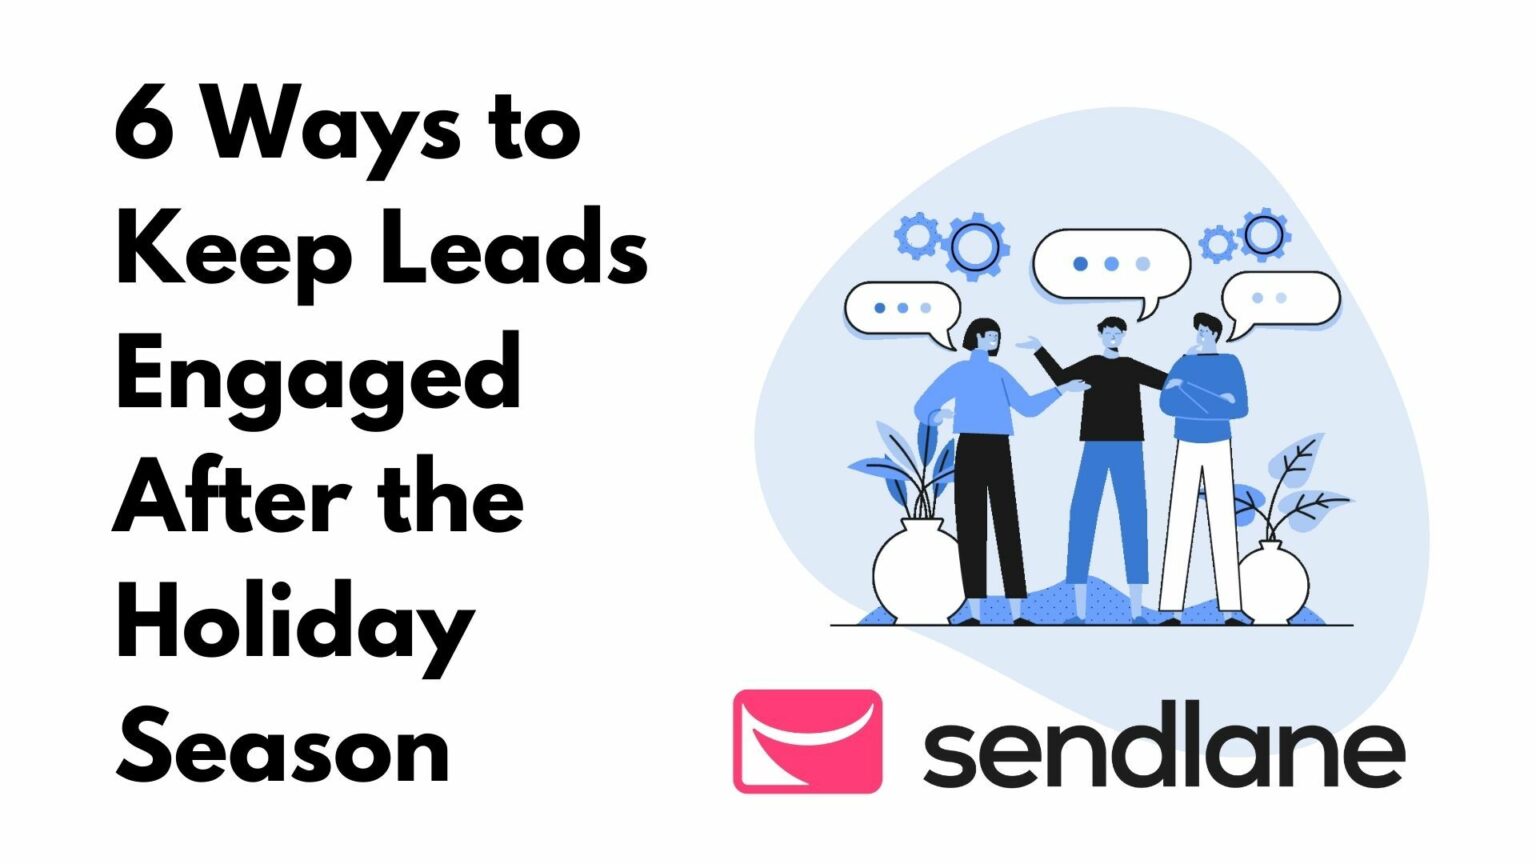 6 Ways to Keep Leads Engaged After the Holiday Season